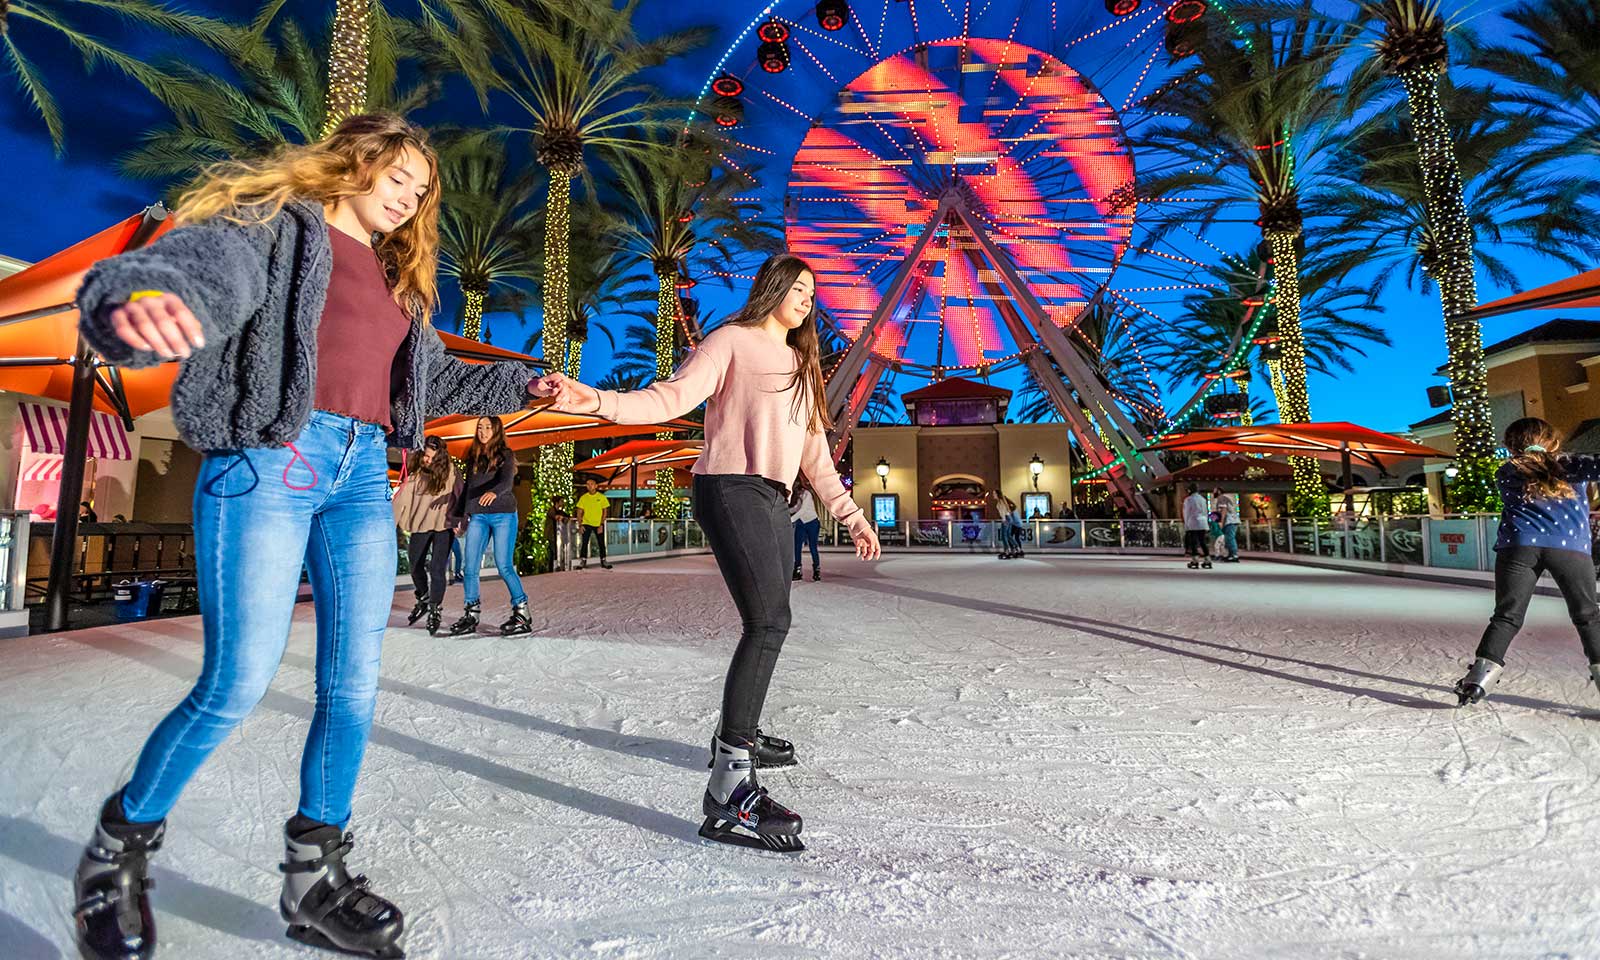 Shop, dine and skate this holiday season at Irvine Spectrum Center